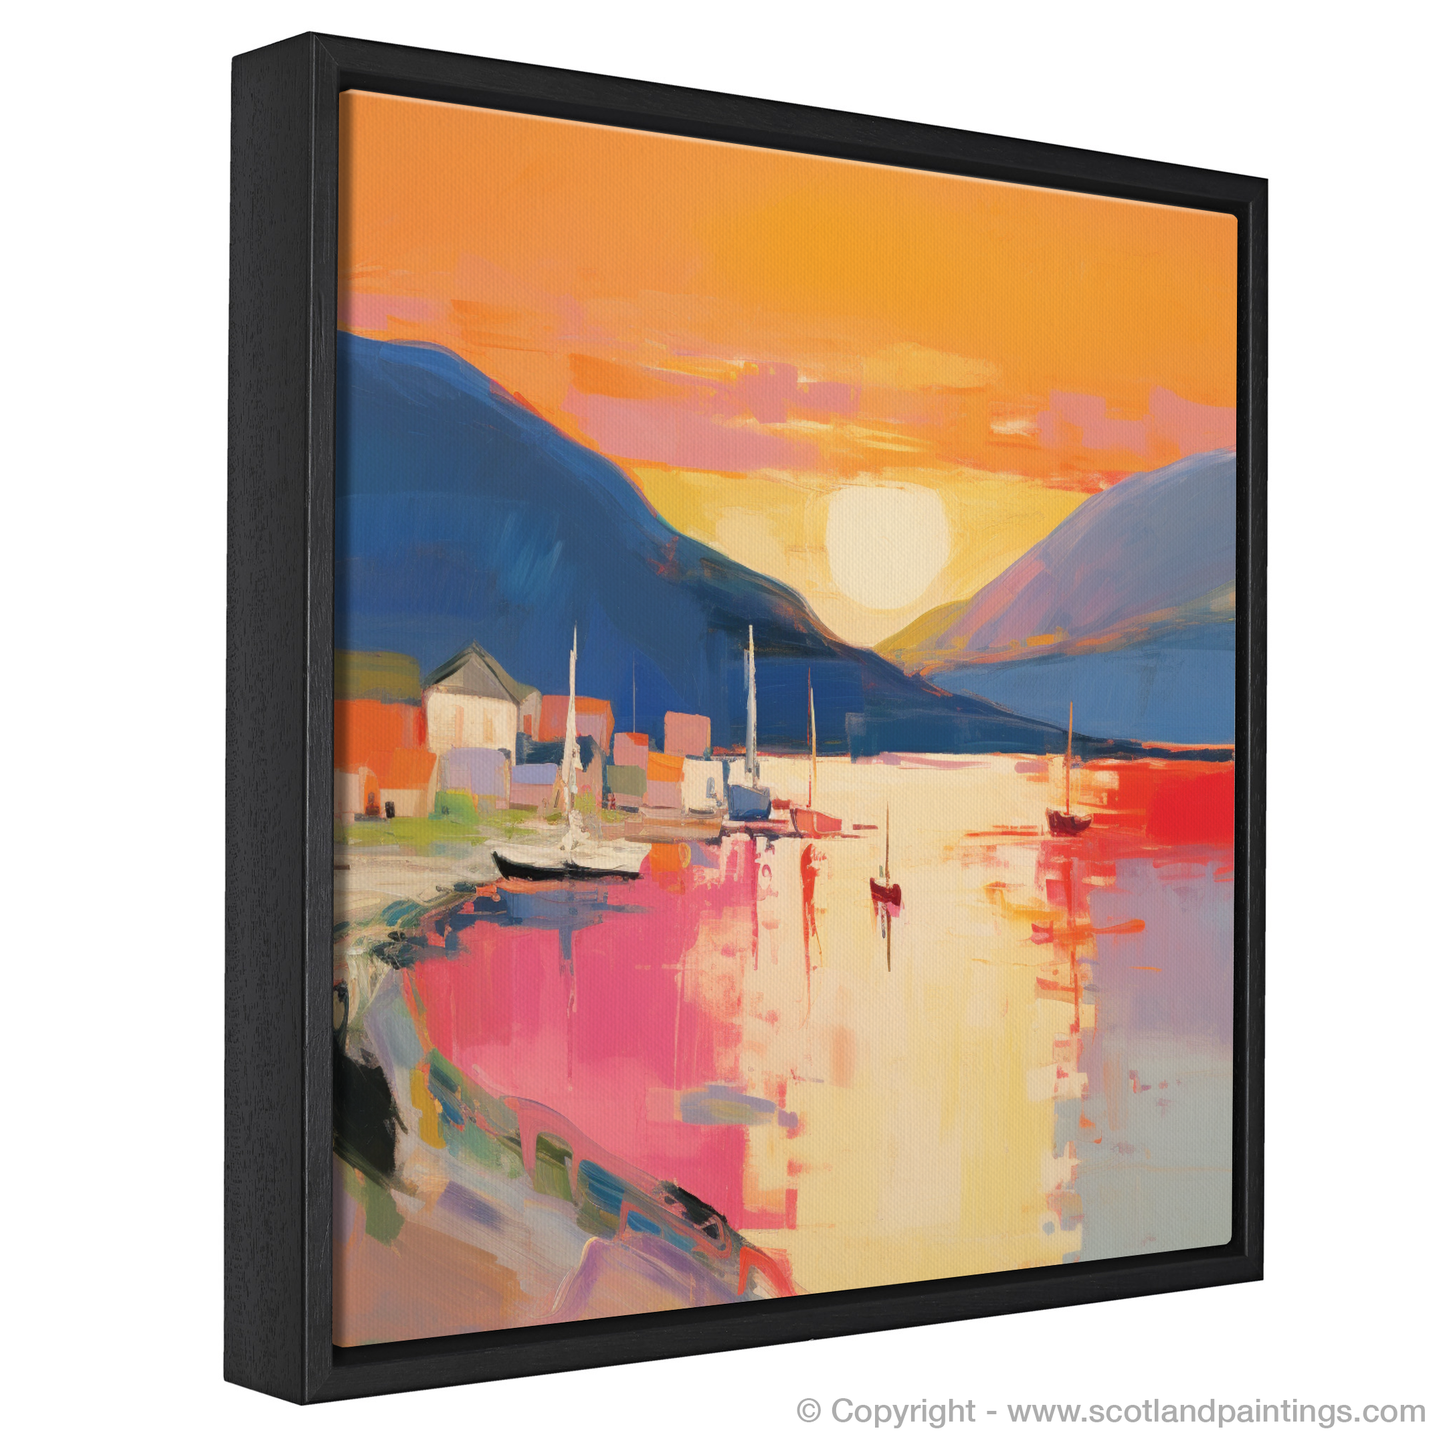 Golden Hour Embrace: An Abstract Ode to Ullapool Harbour